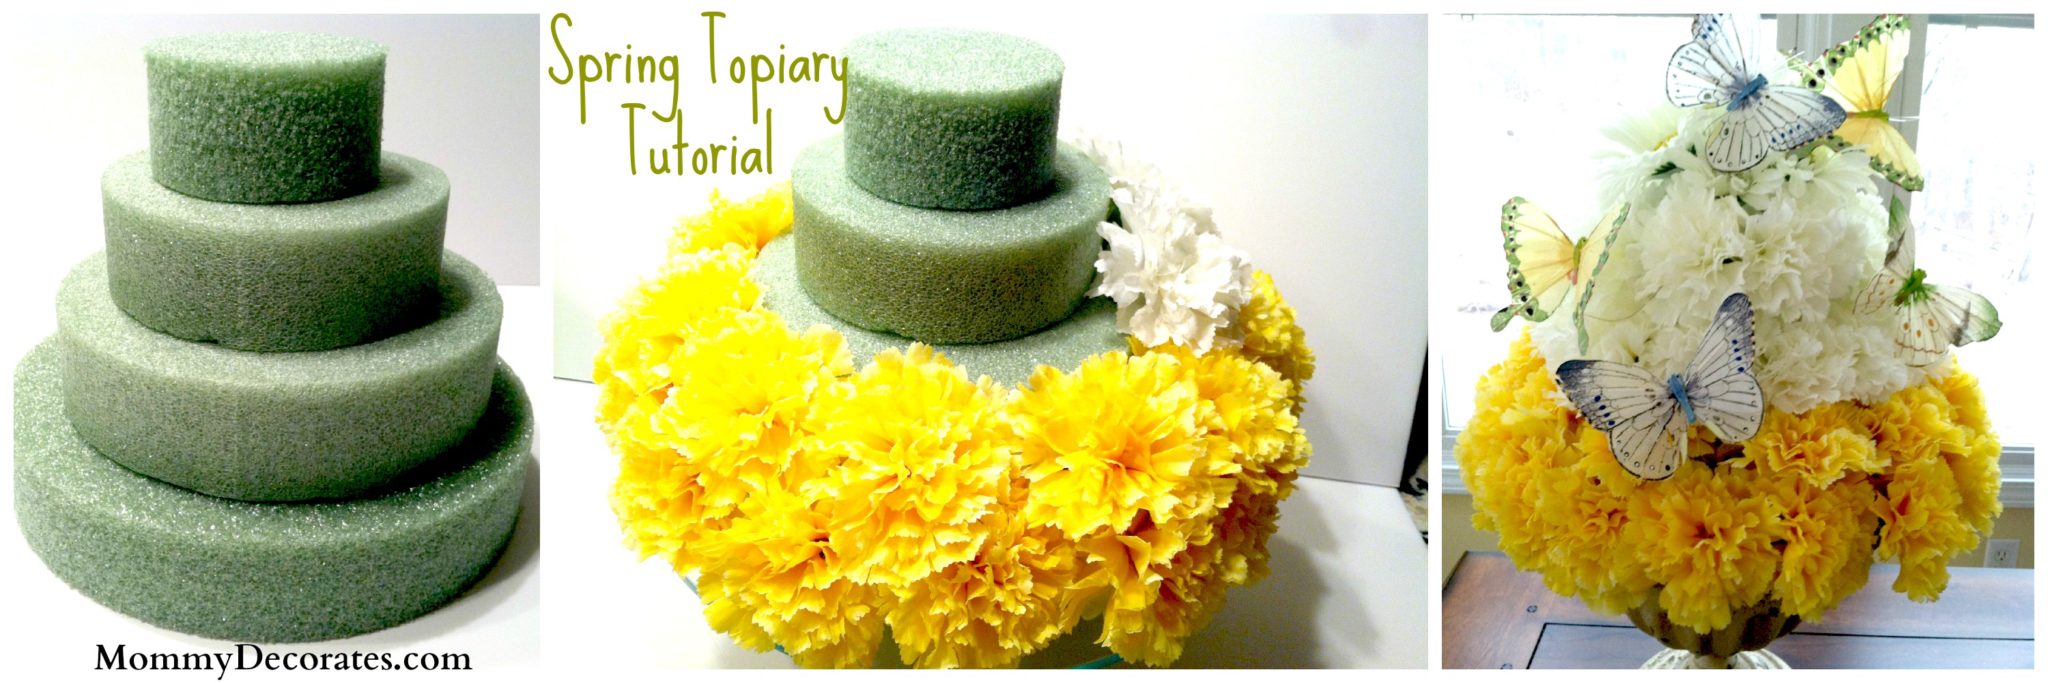 Spring Topiary – How to make one 3 Pictures